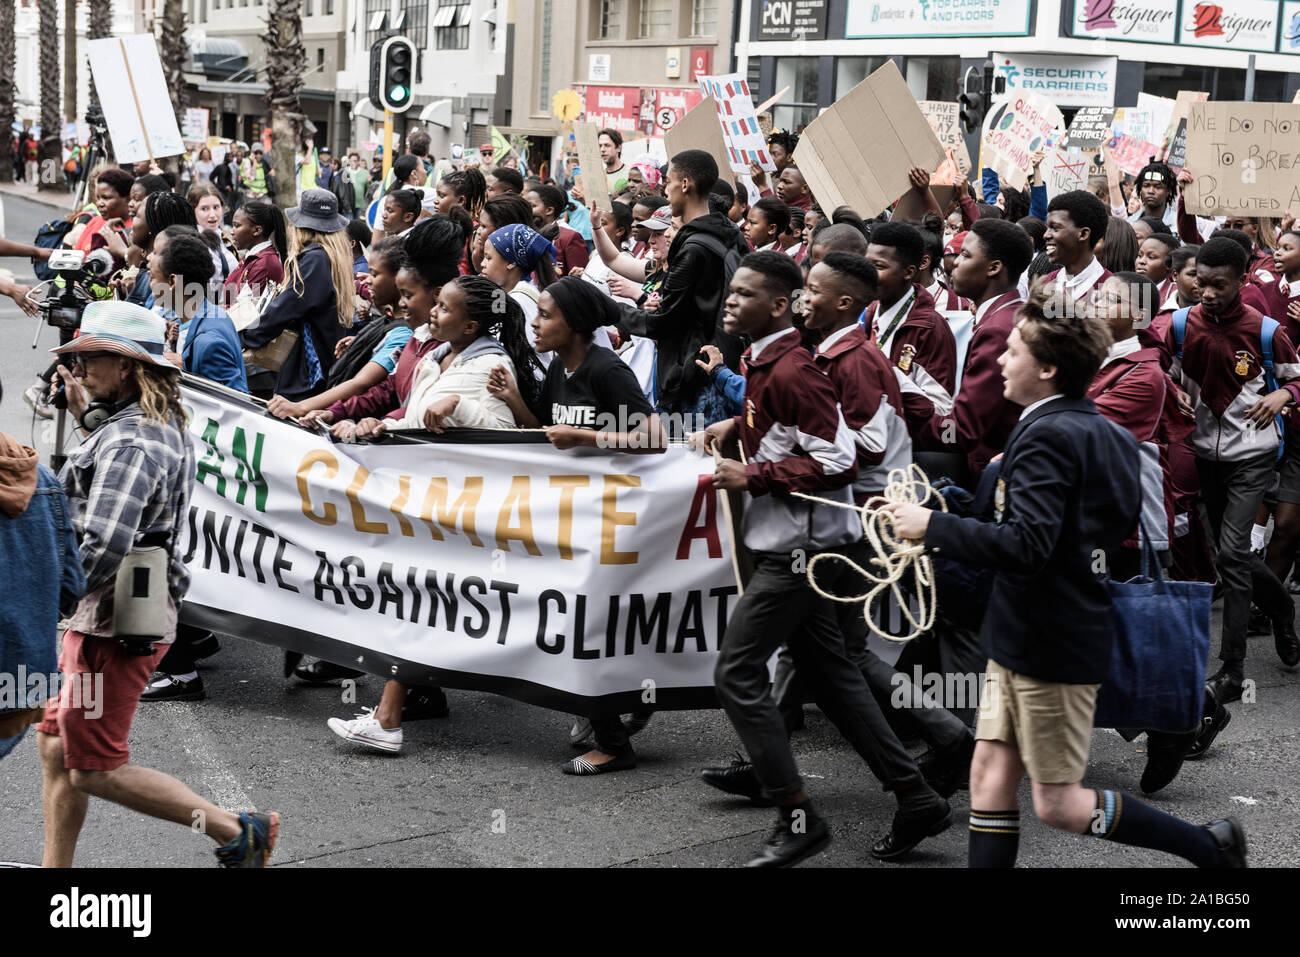 Protesters participate in the global climate strike inspired by climate activist Greta Thunberg in Cape Town, South Africa - 20 March 2019 Stock Photo